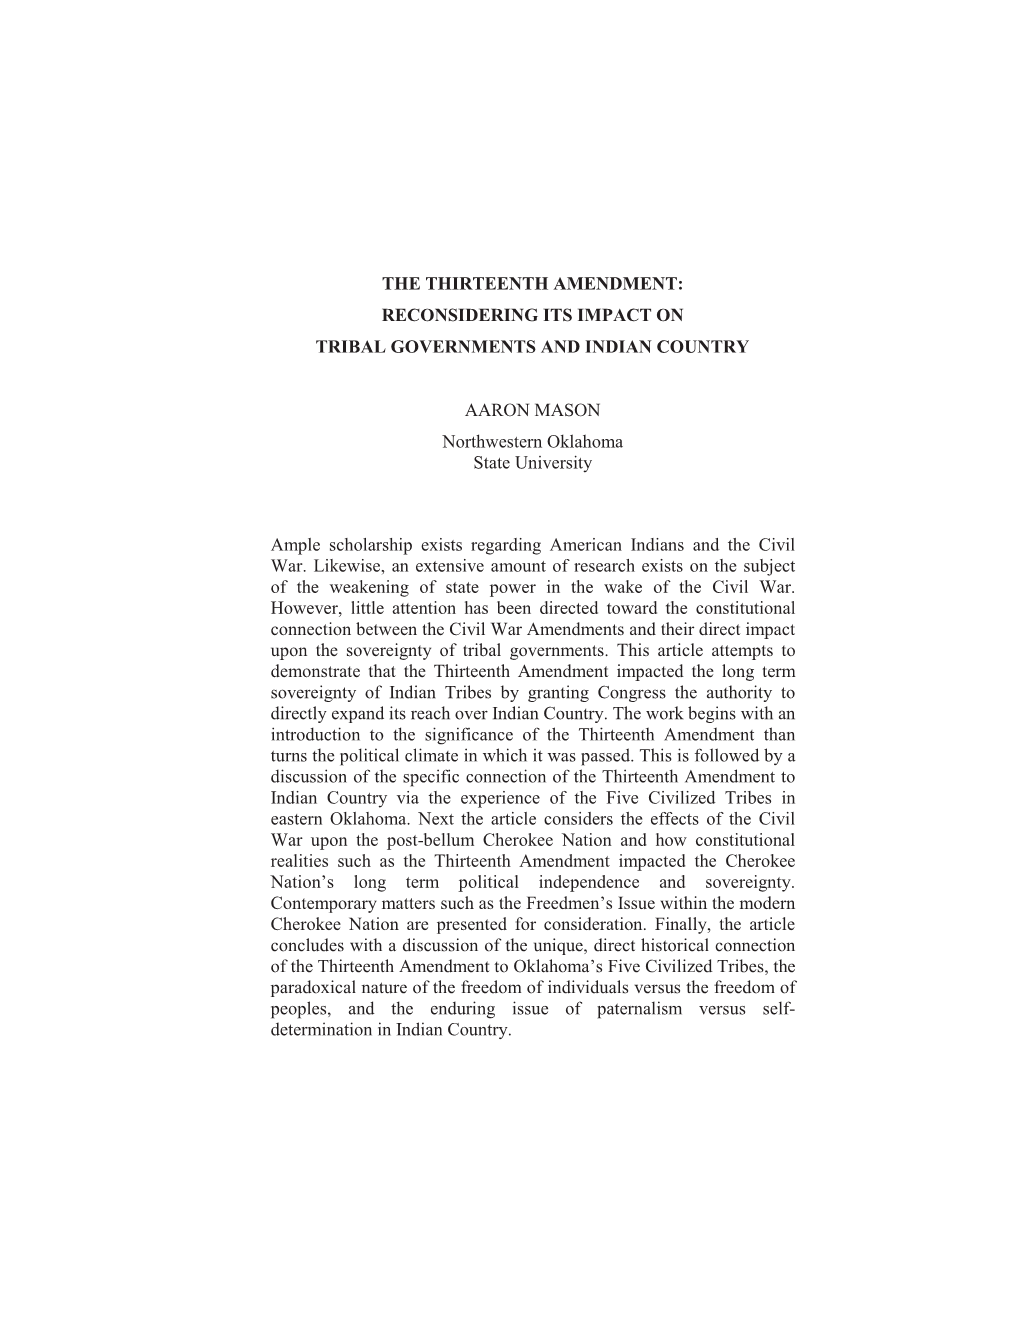 The Thirteenth Amendment: Reconsidering Its Impact on Tribal Governments and Indian Country